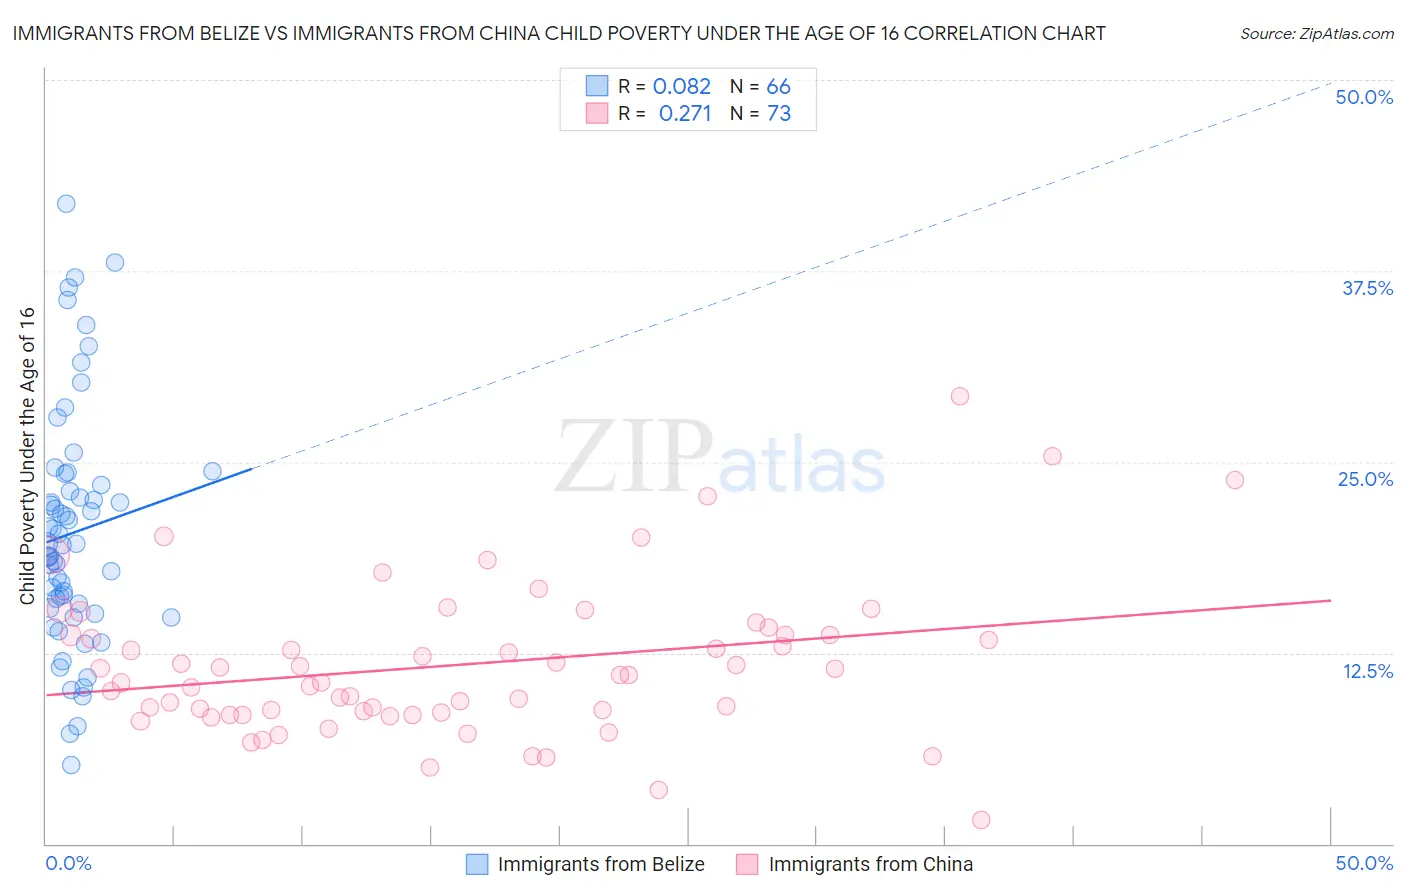 Immigrants from Belize vs Immigrants from China Child Poverty Under the Age of 16